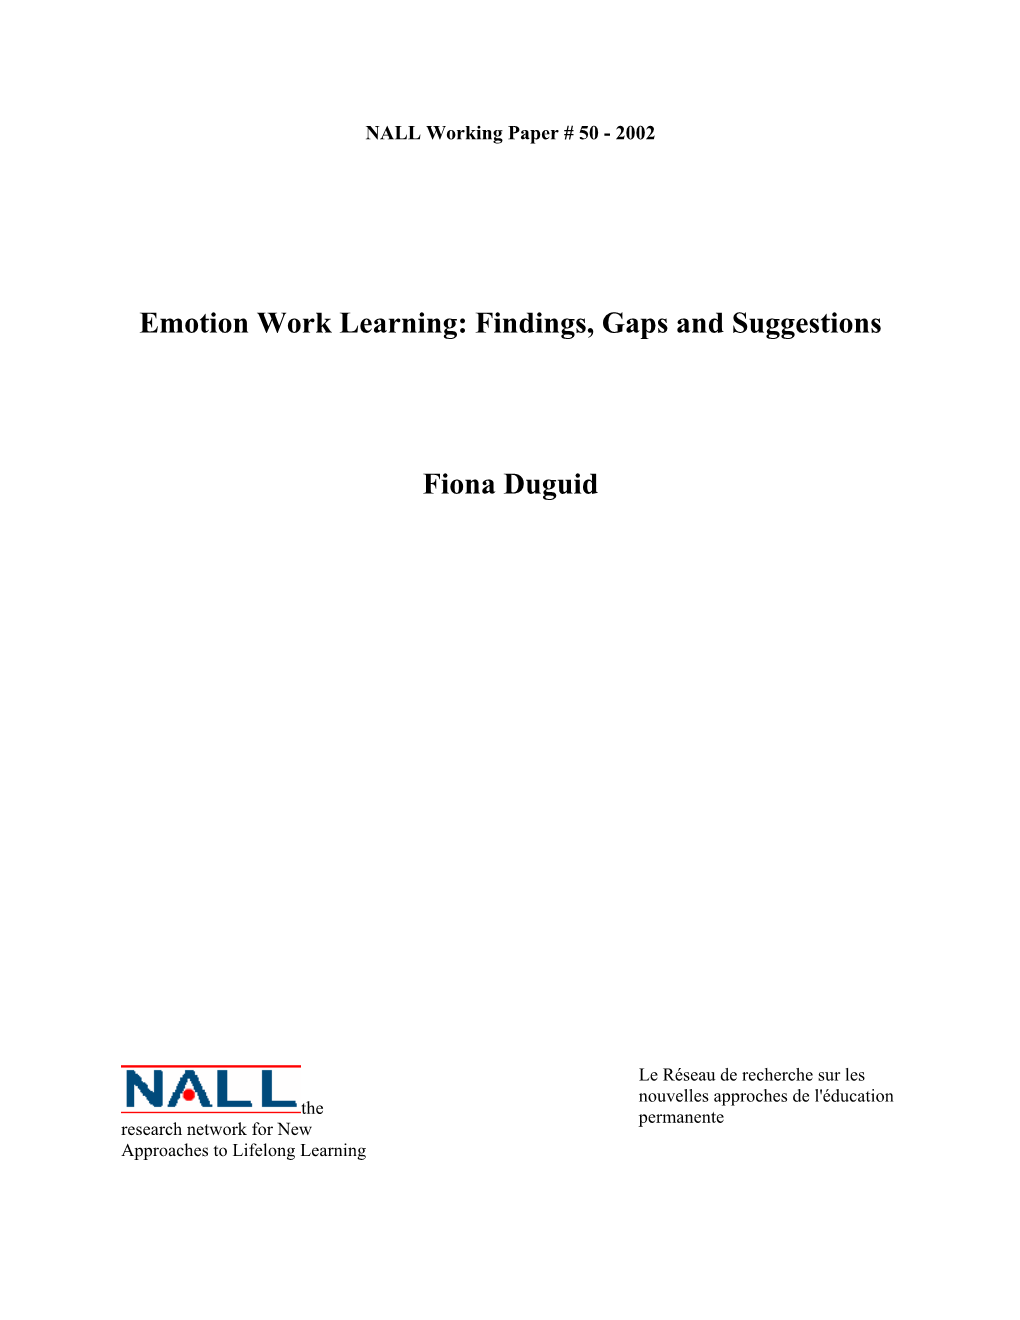 Emotion Work Learning: Findings, Gaps and Suggestions